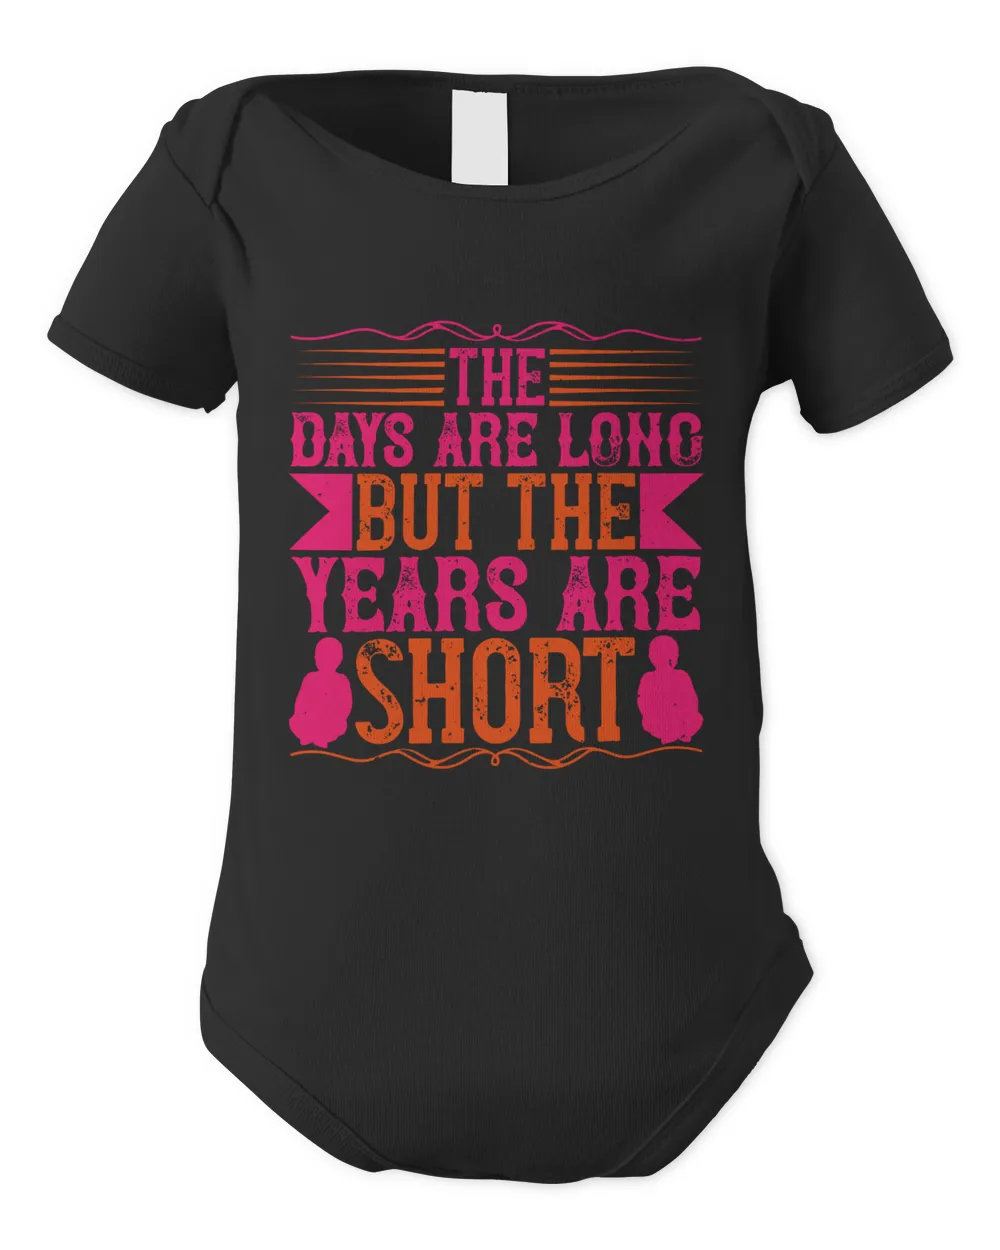 The Days Are Long, But The Years Are Short01 Baby Shirt, Gift For Family, Toddler T Shirt, Baby Bodysuit